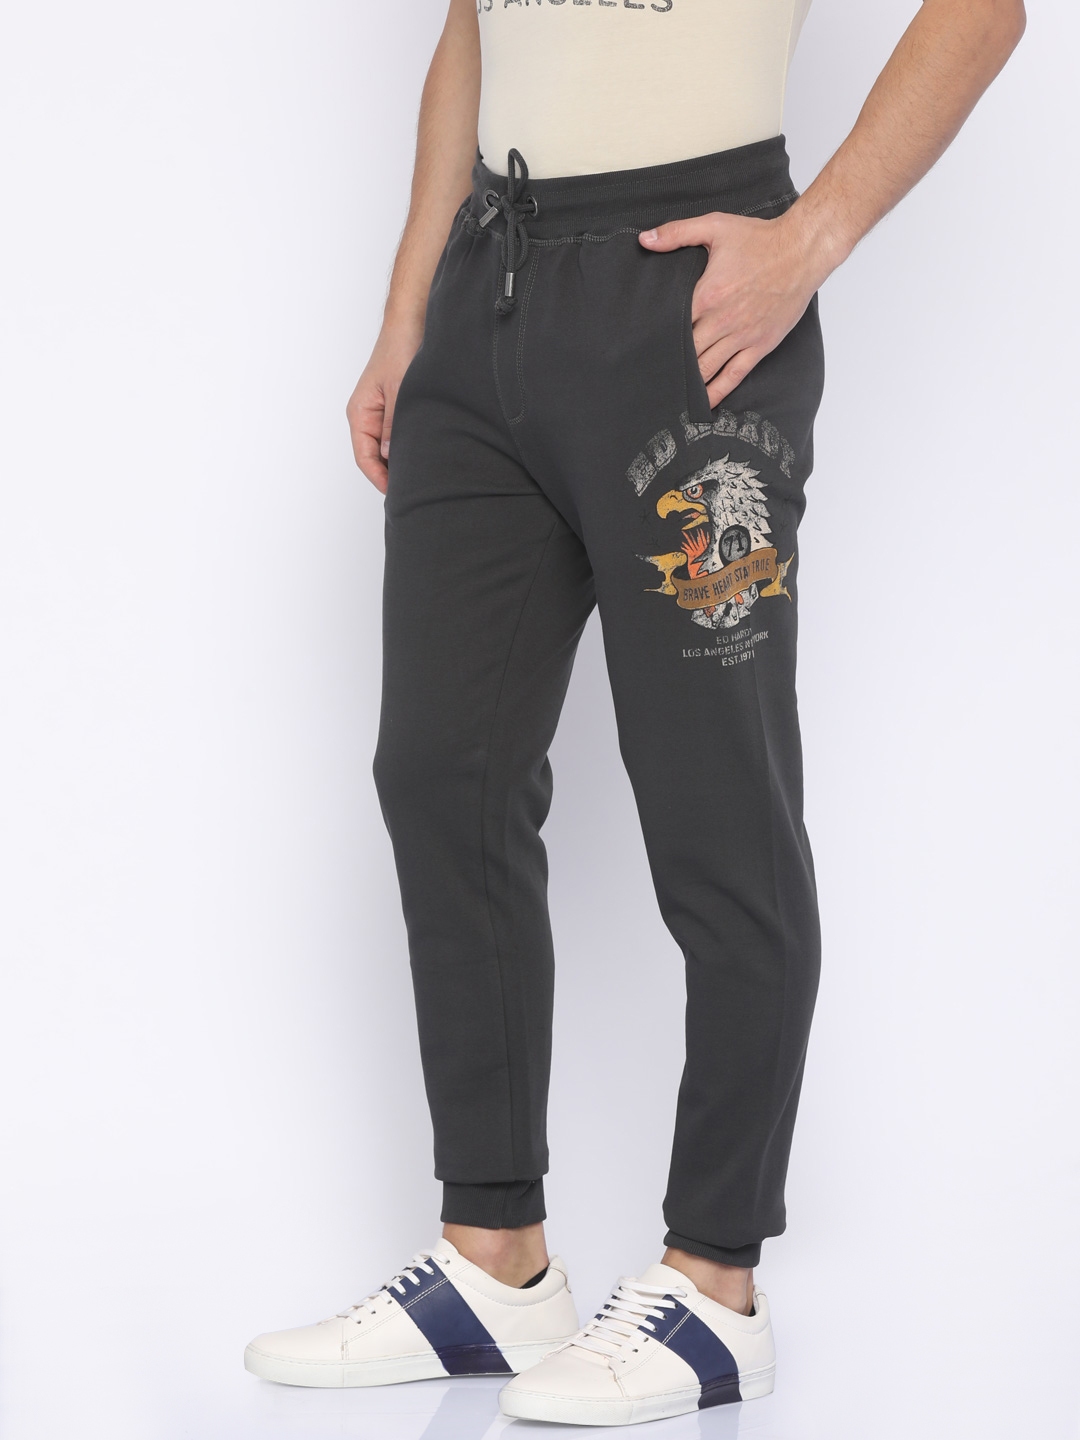 Ed Hardy UO Exclusive Black Cargo Pants  Urban Outfitters UK